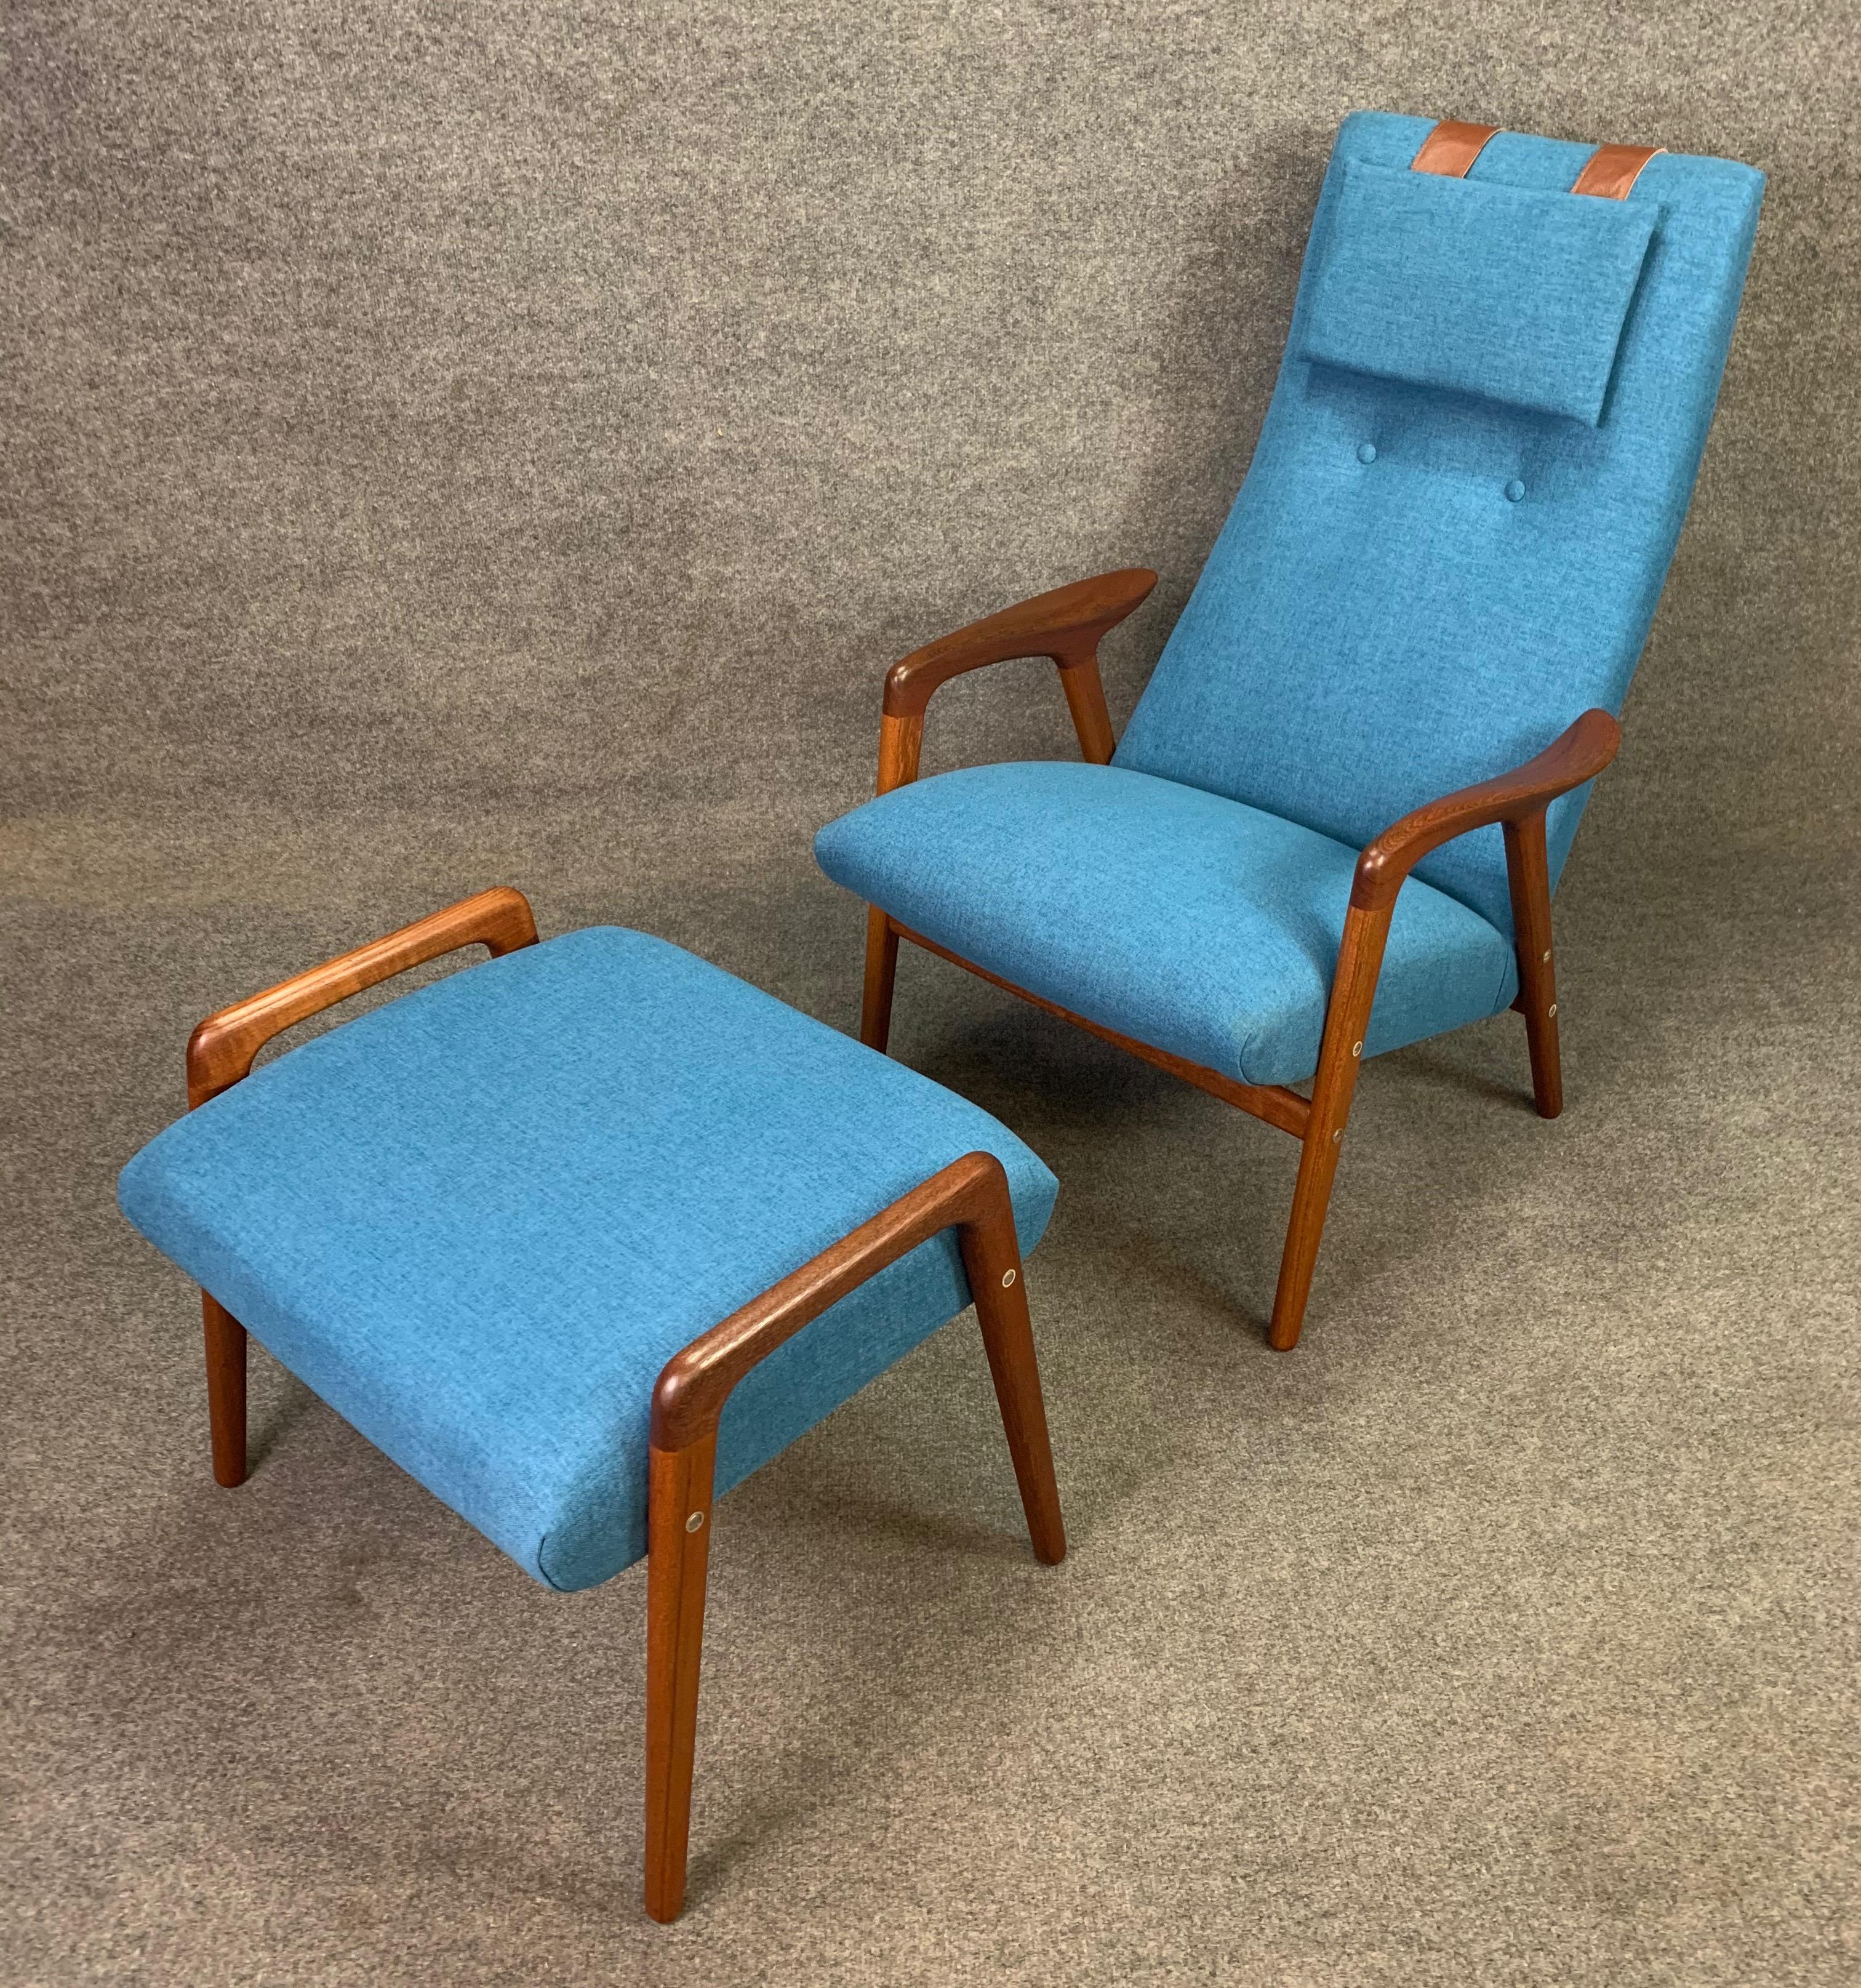 Here is a beautiful scandinavian modern easy chair and its ottoman in teak designed by Yngve Ekström and manufactured by Swedese in Sweden in the 1960's.
This sculptural and comfortable set features a fully refinished solid teak frame with organic